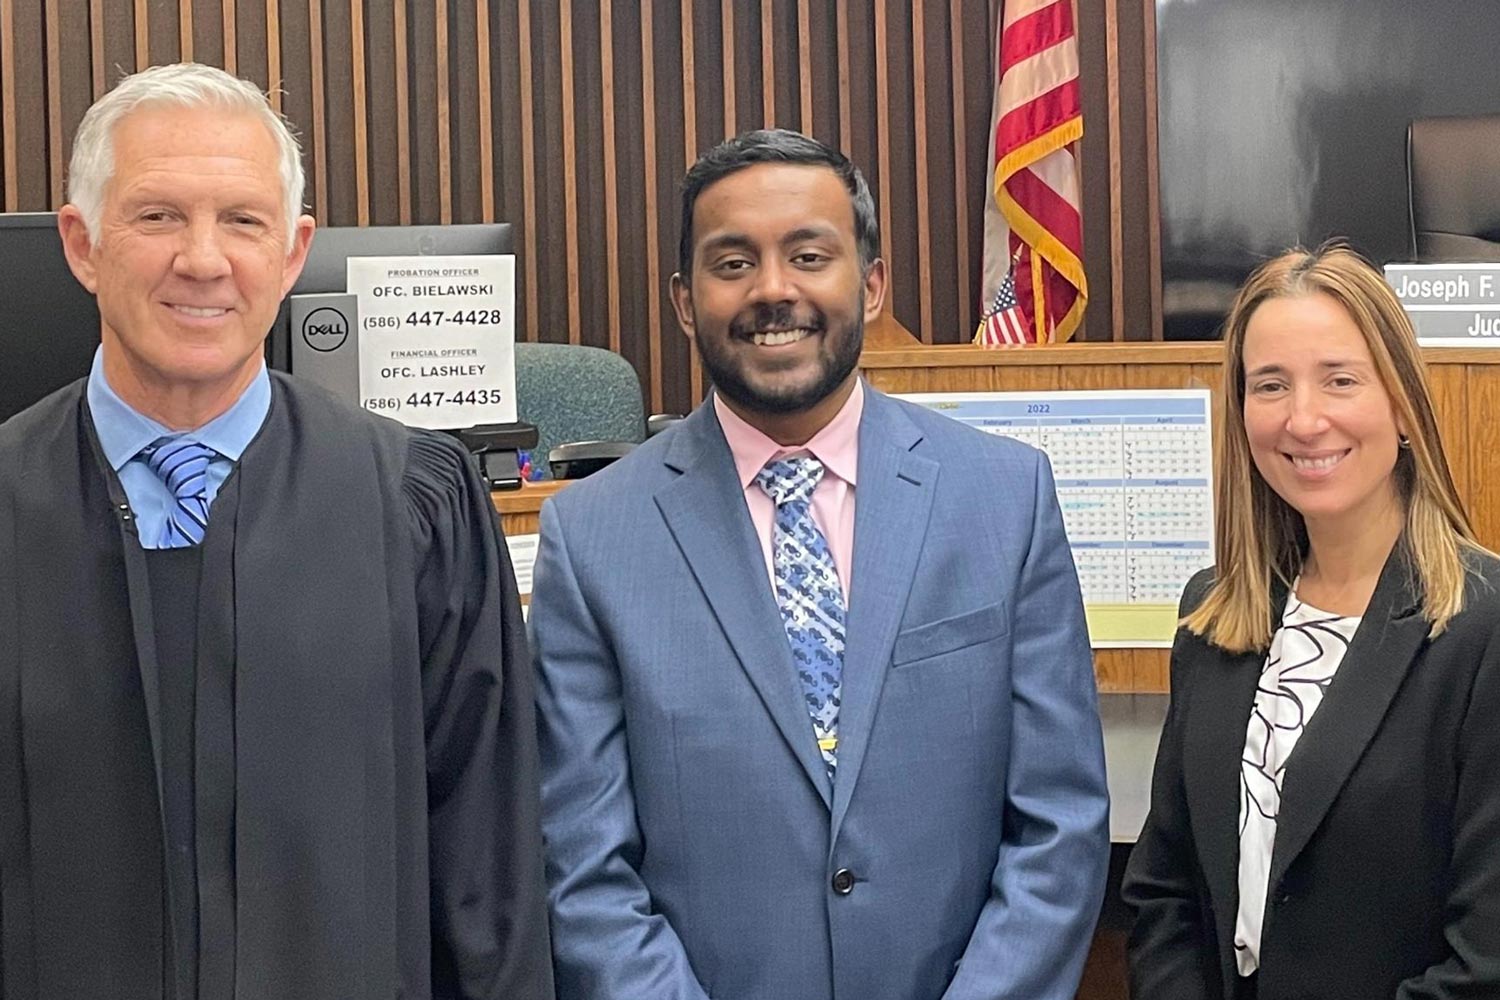 Muthu Veerappan photographed smiling with Judge Joseph F. Boedecker and Macomb County Assistant Prosecuting Attorney Jacqueline Gartin